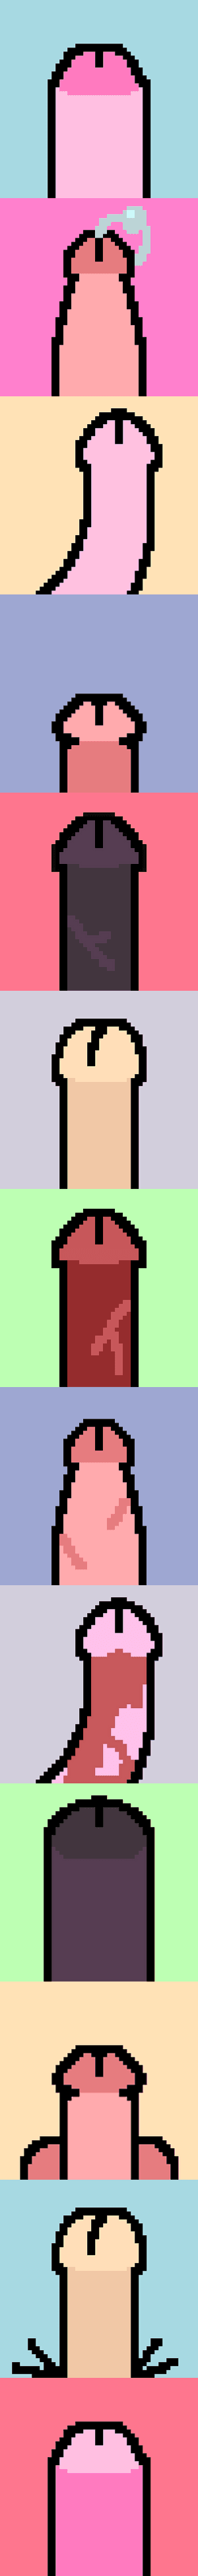 Unsolicited 8-bit Dick Pics collection image